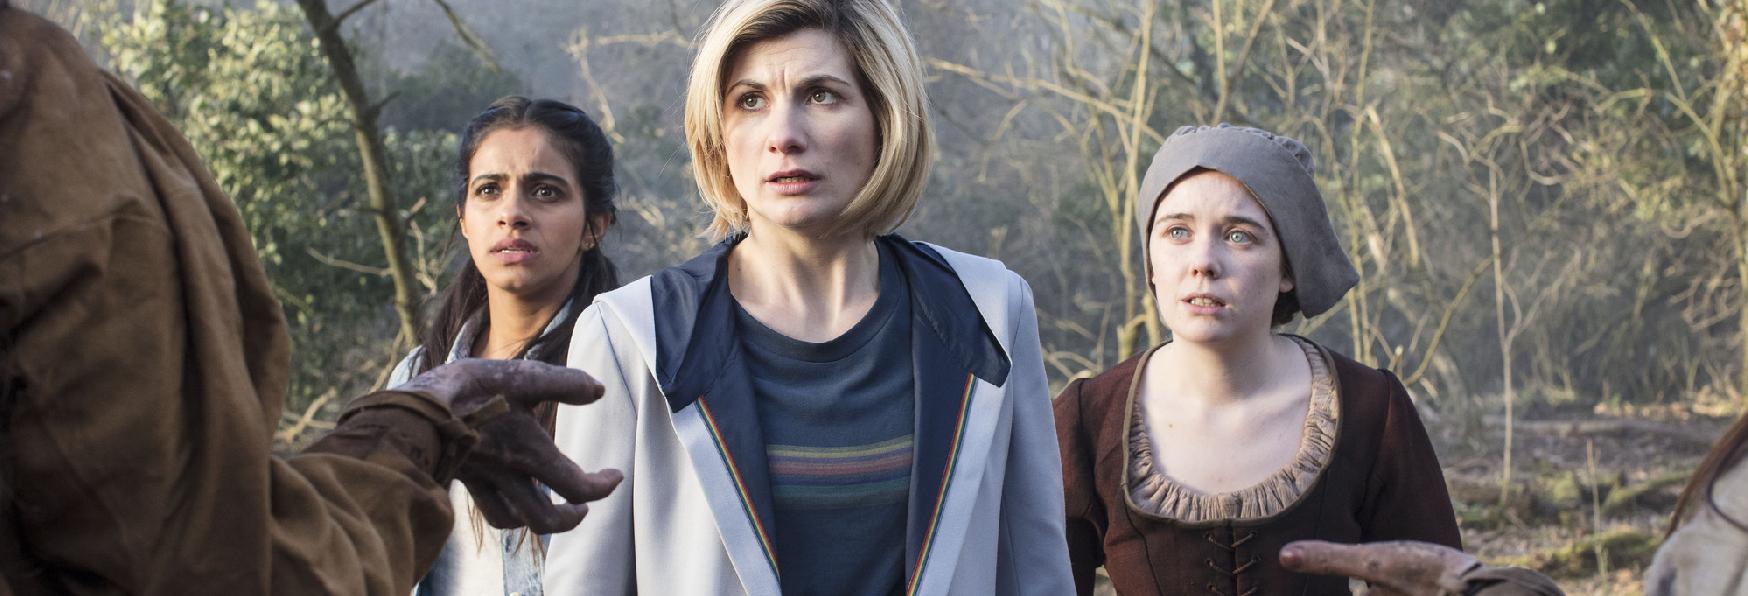 Doctor Who: Recensione dell'Episodio 11x08: The Witchfinders